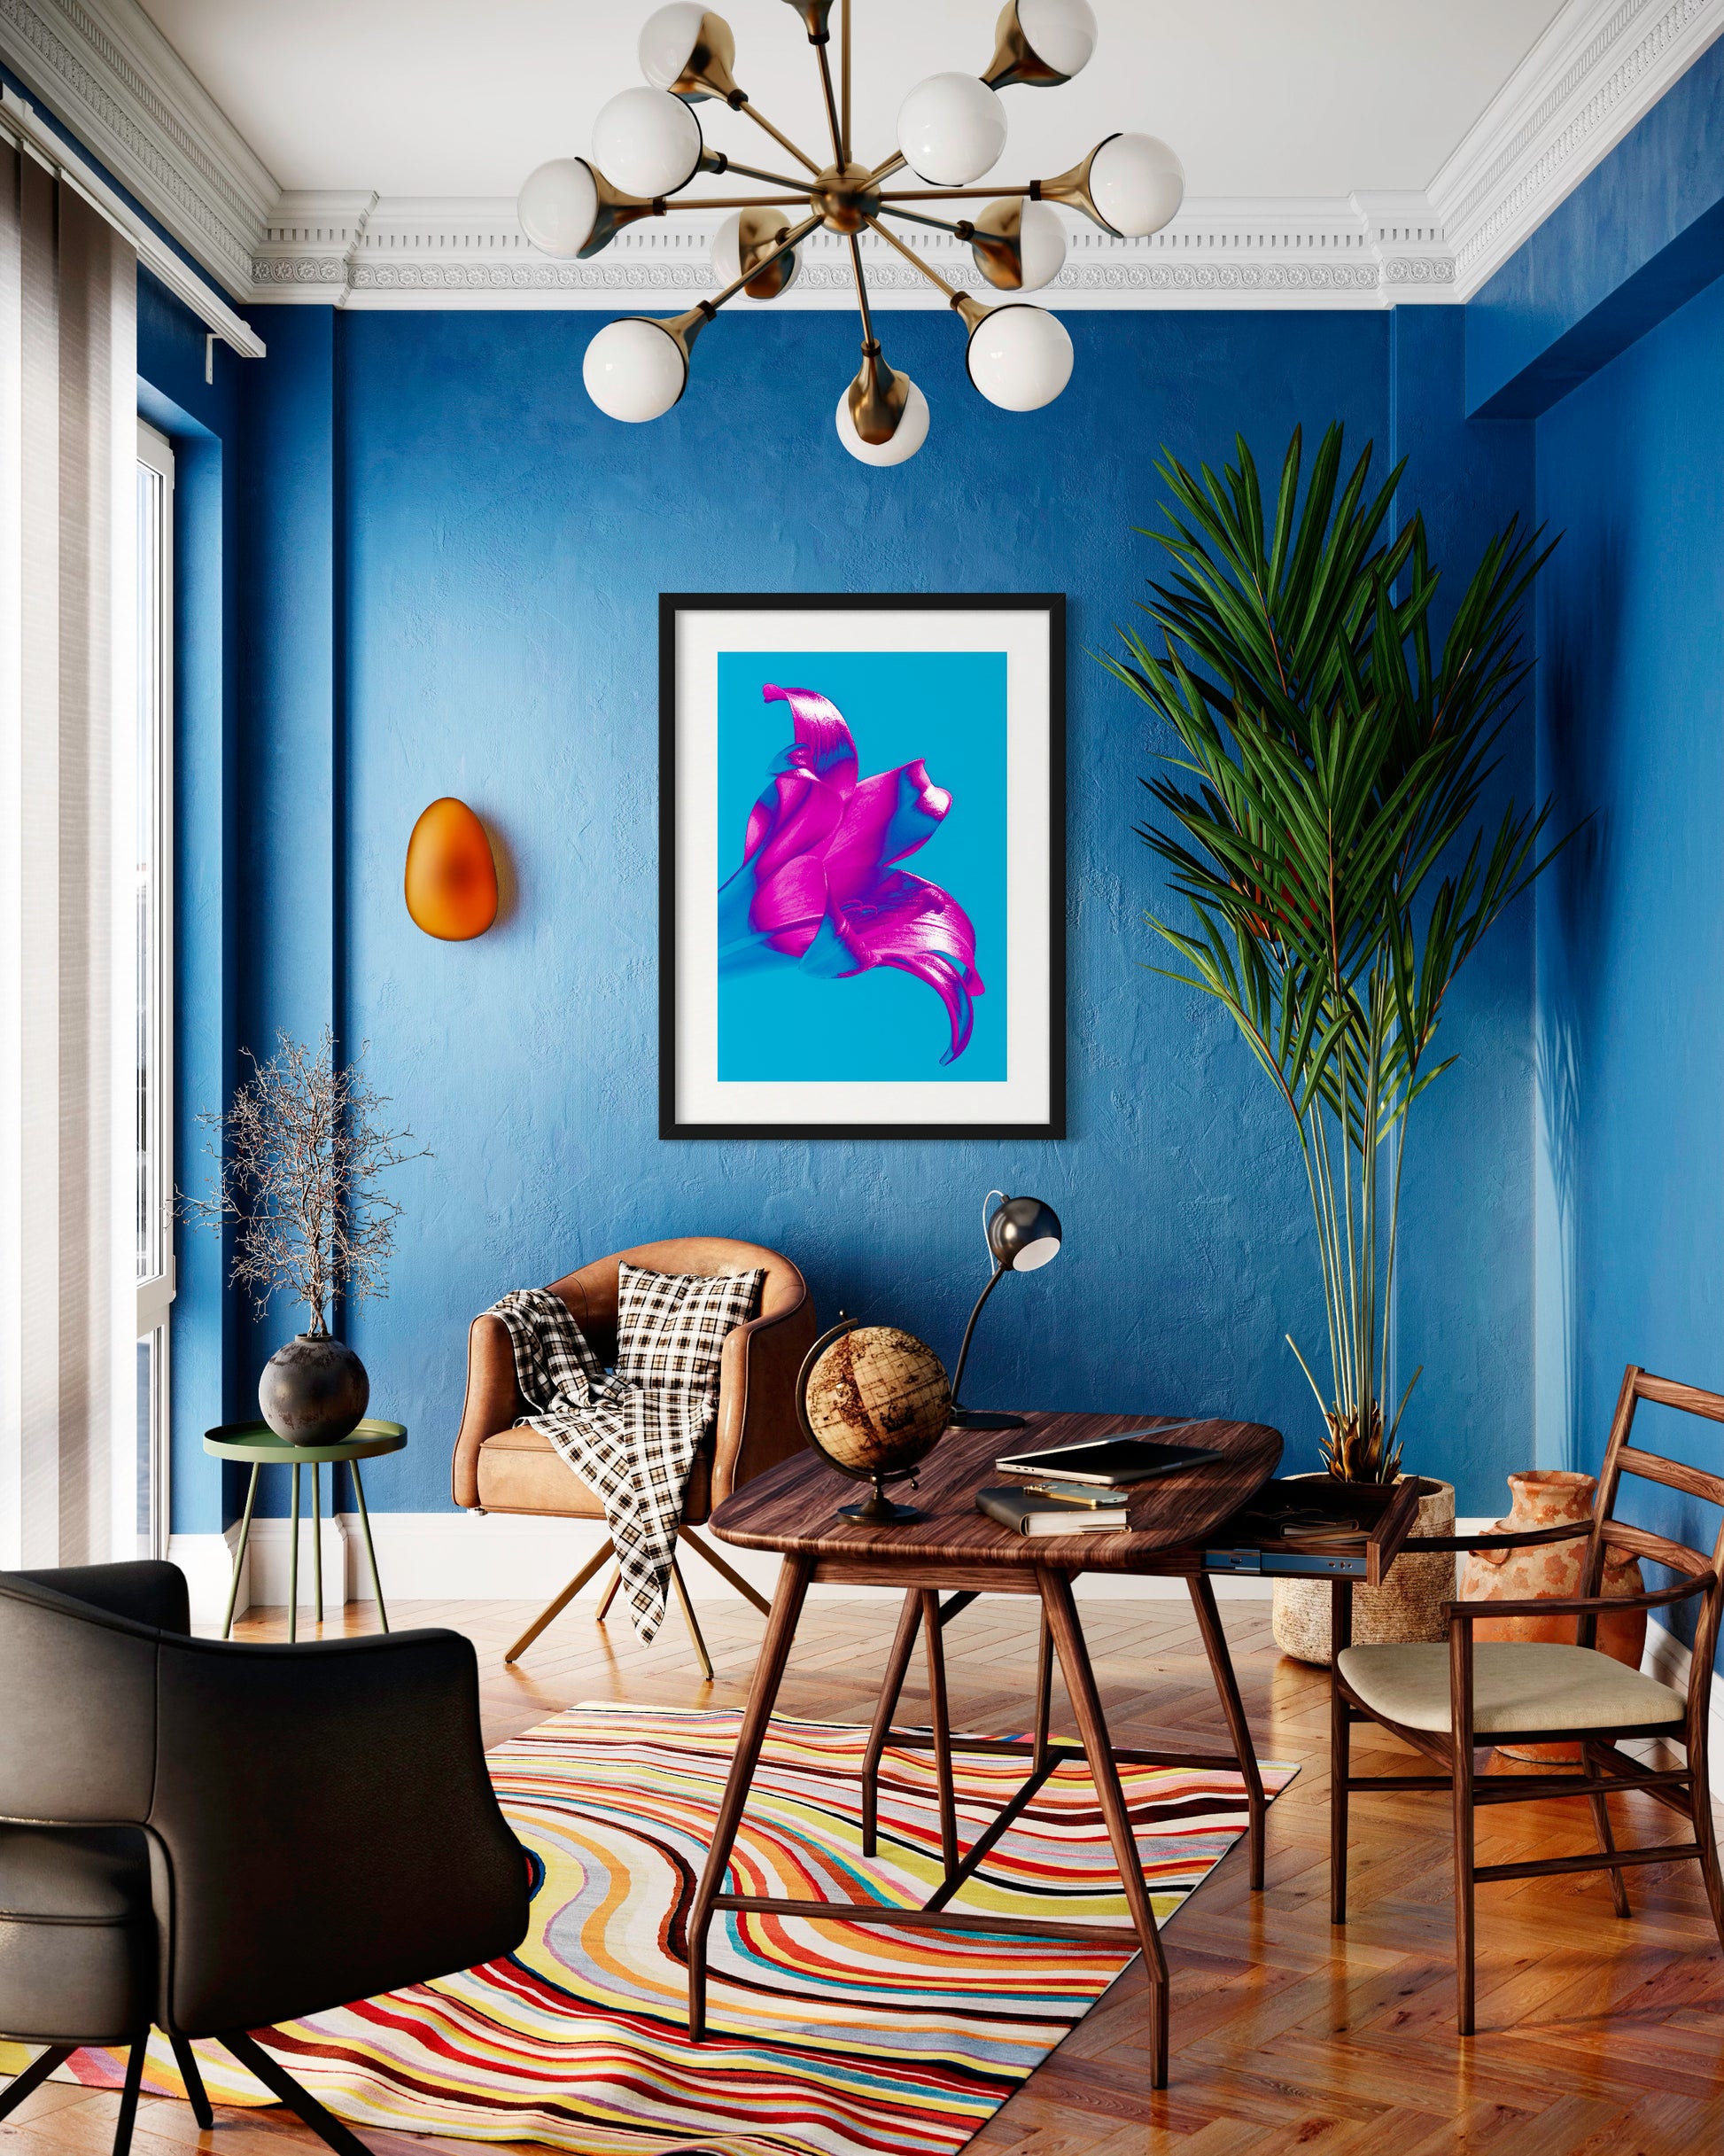 bright pop art photo of pink lily on blue background in black frame in modern room with blue walls